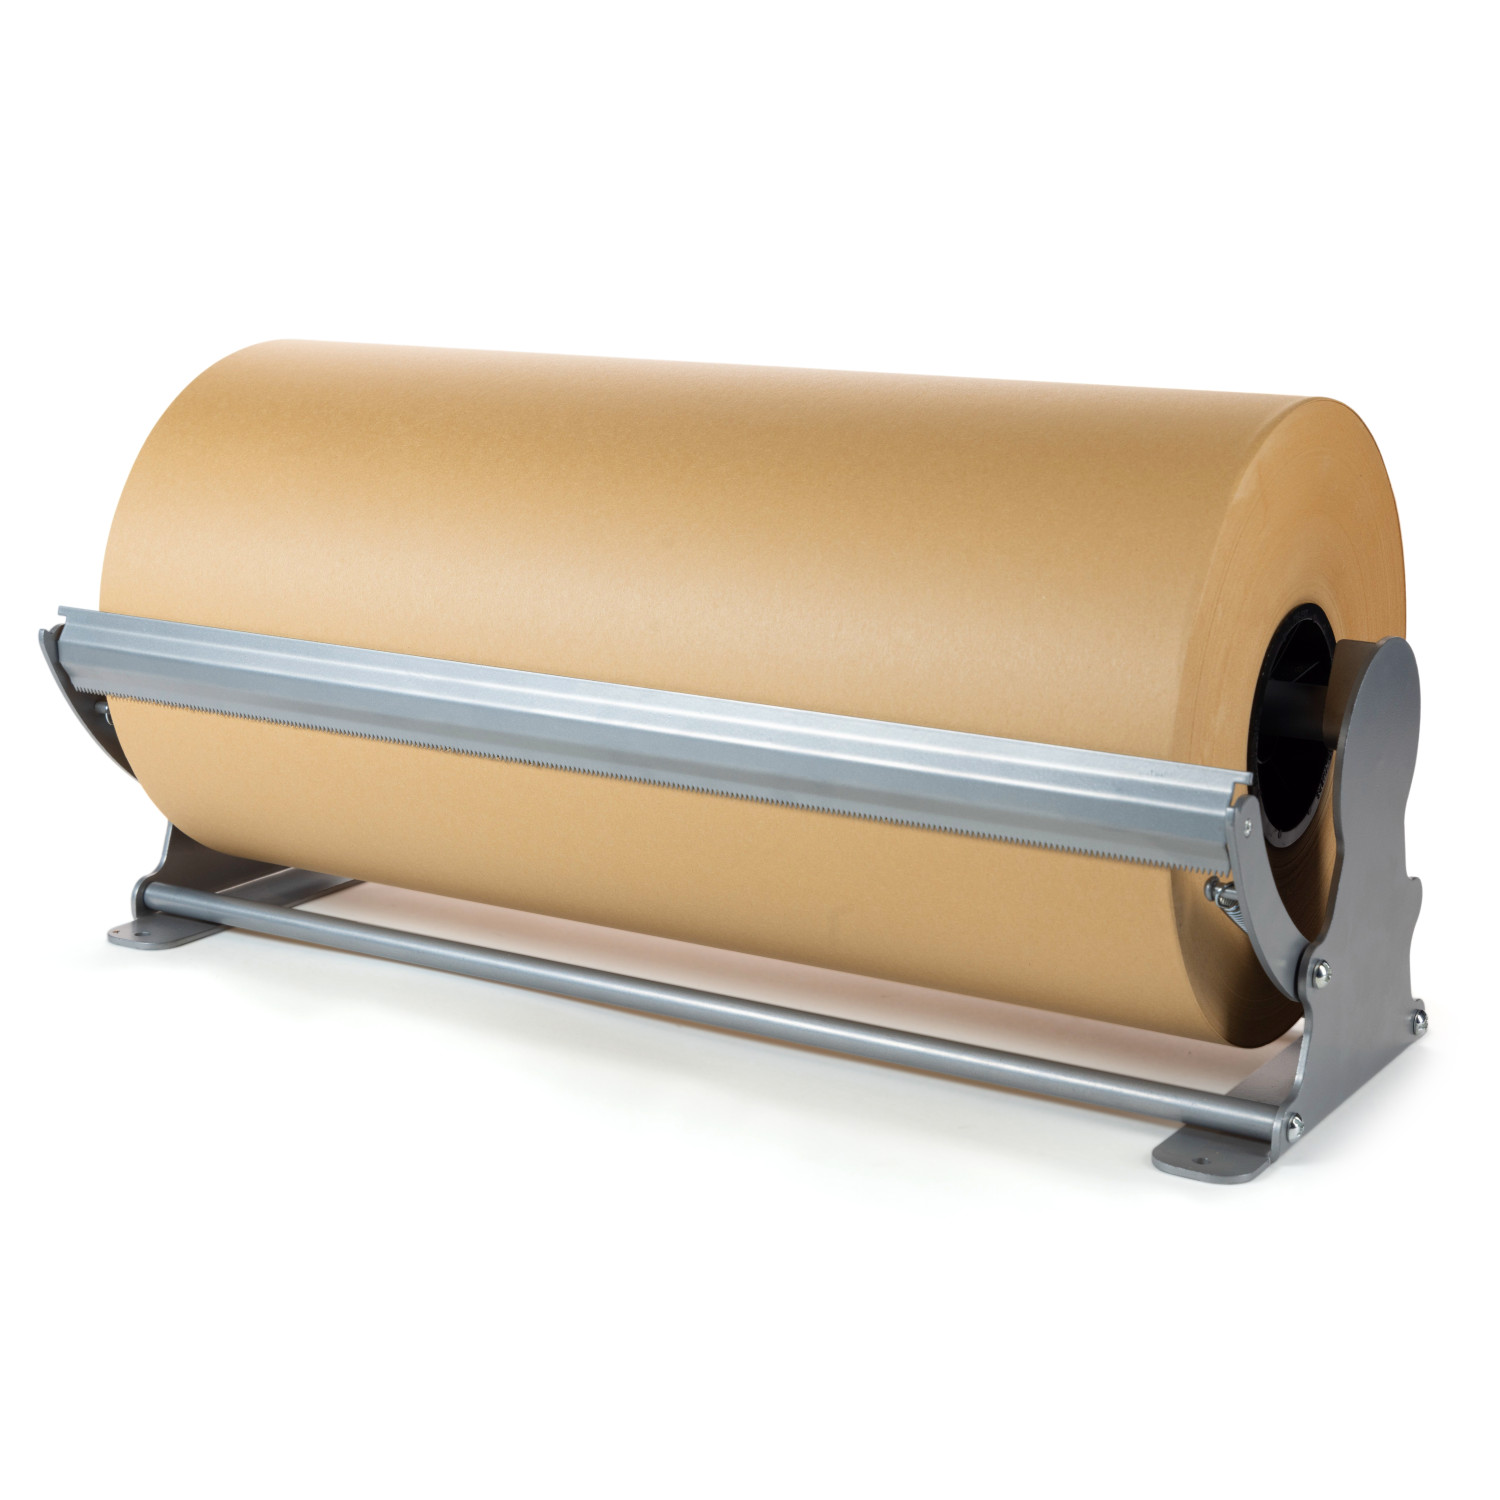 PD-RD18 Kraft Paper Roll Dispenser & Cutter for Rolls up to 18 Wide and 9  in Diameter buy in stock in U.S. in IDL Packaging